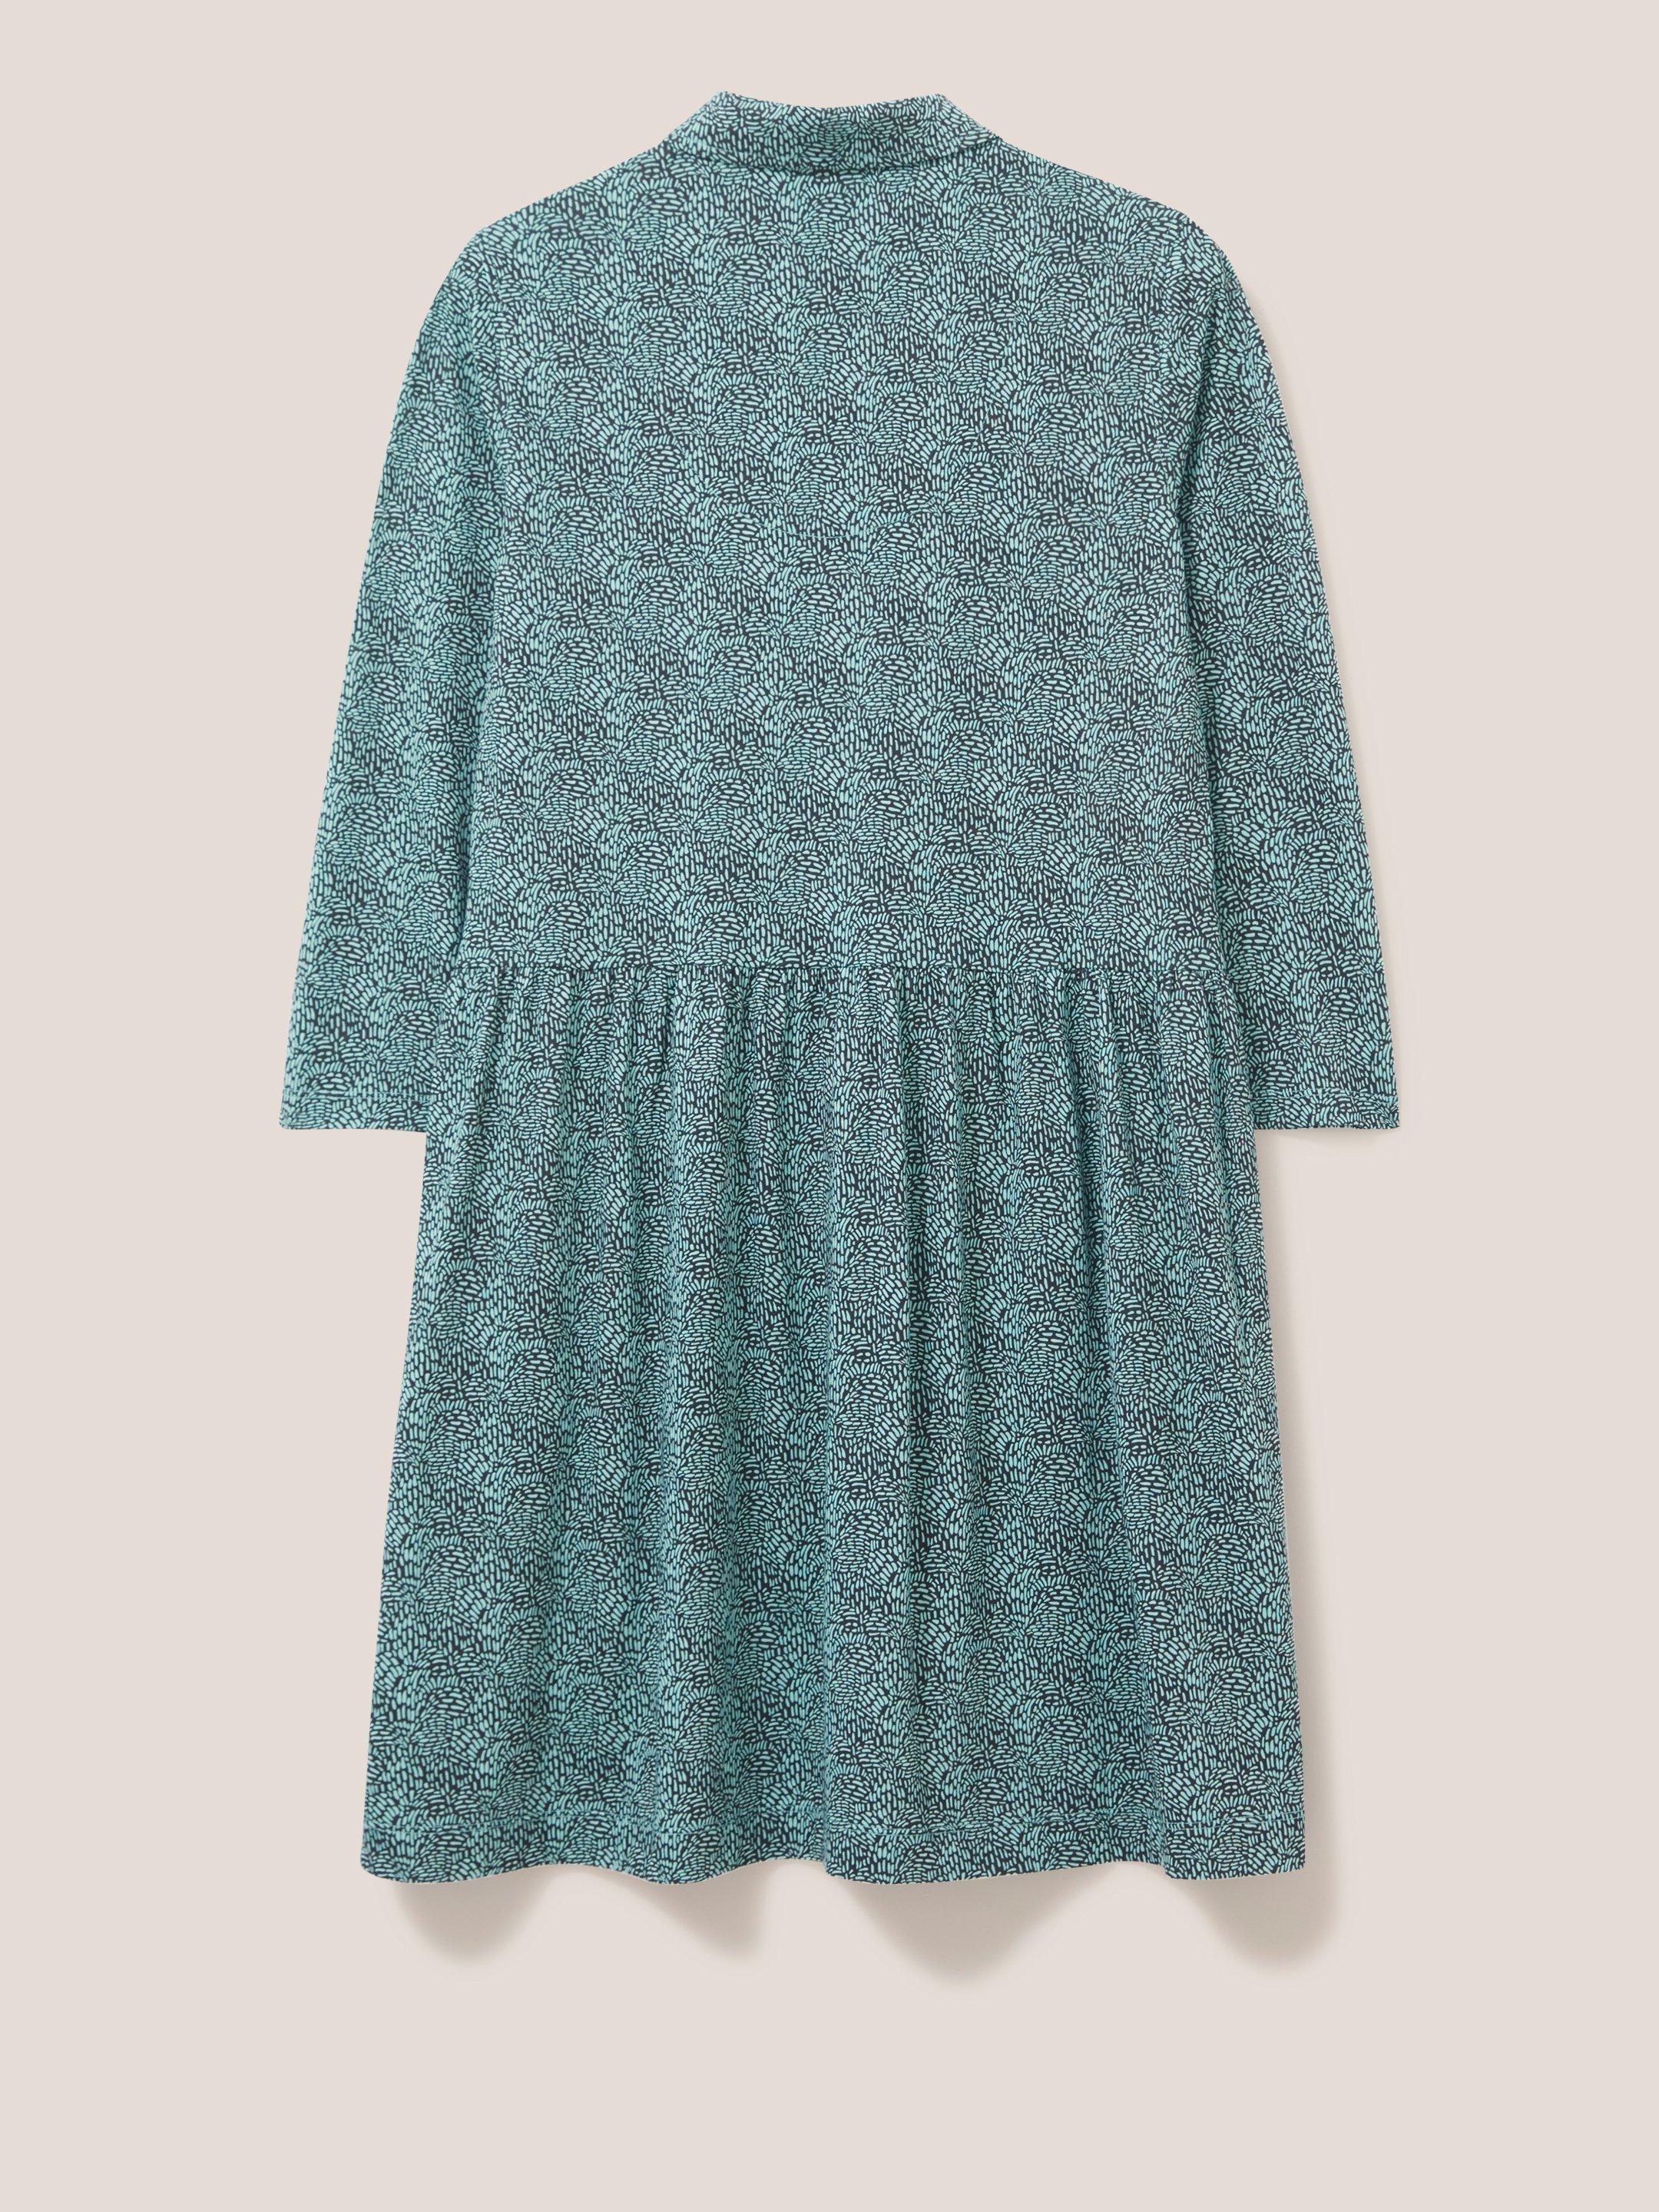 Everly Jersey Dress in TEAL MLT - FLAT BACK